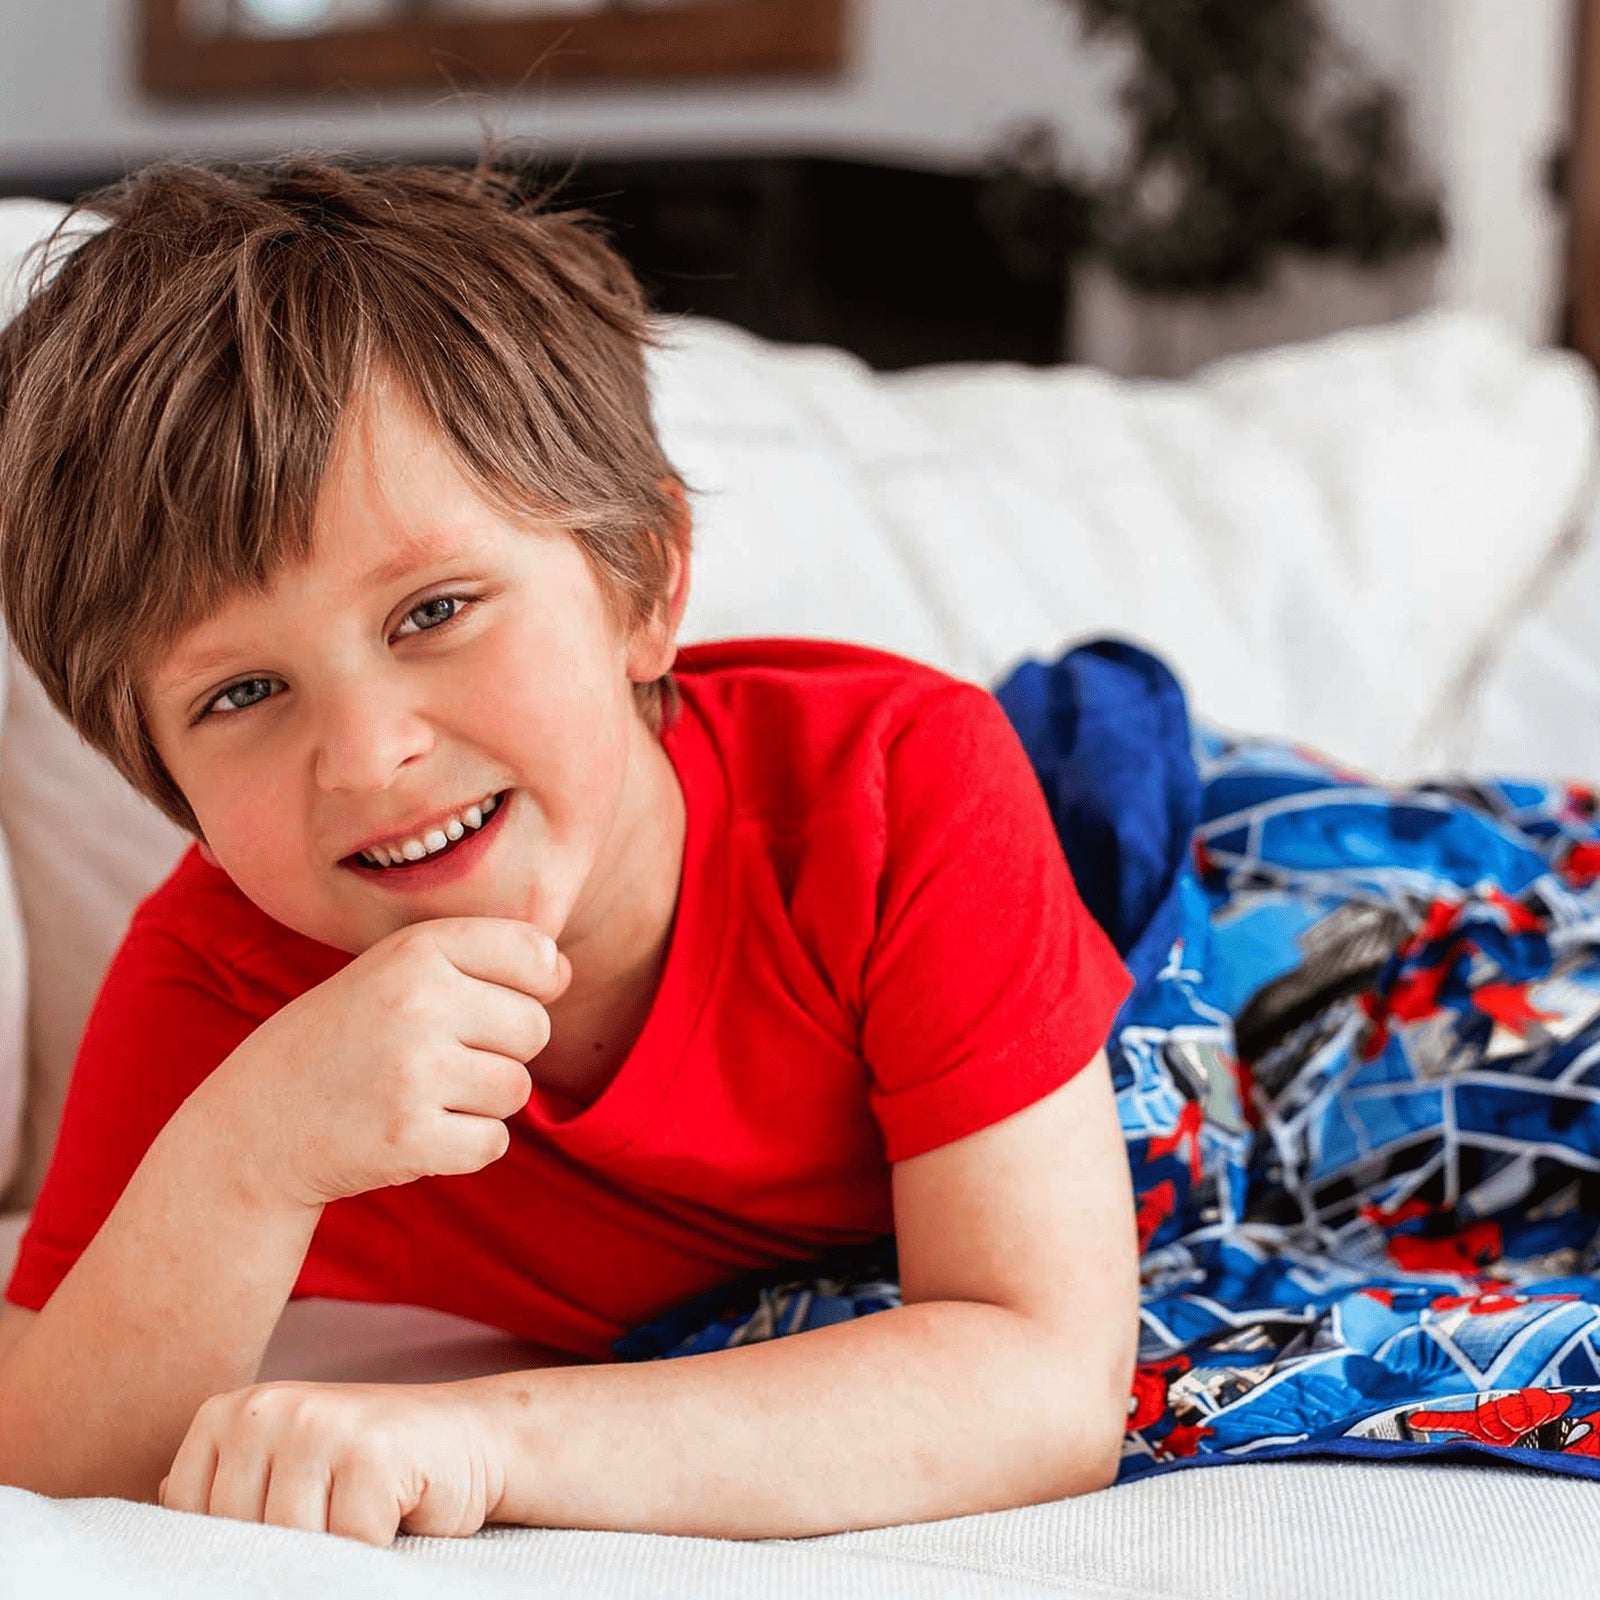 Kids – It’s summer, so now what? Are weighted blankets too hot in summer (??) and summer activity